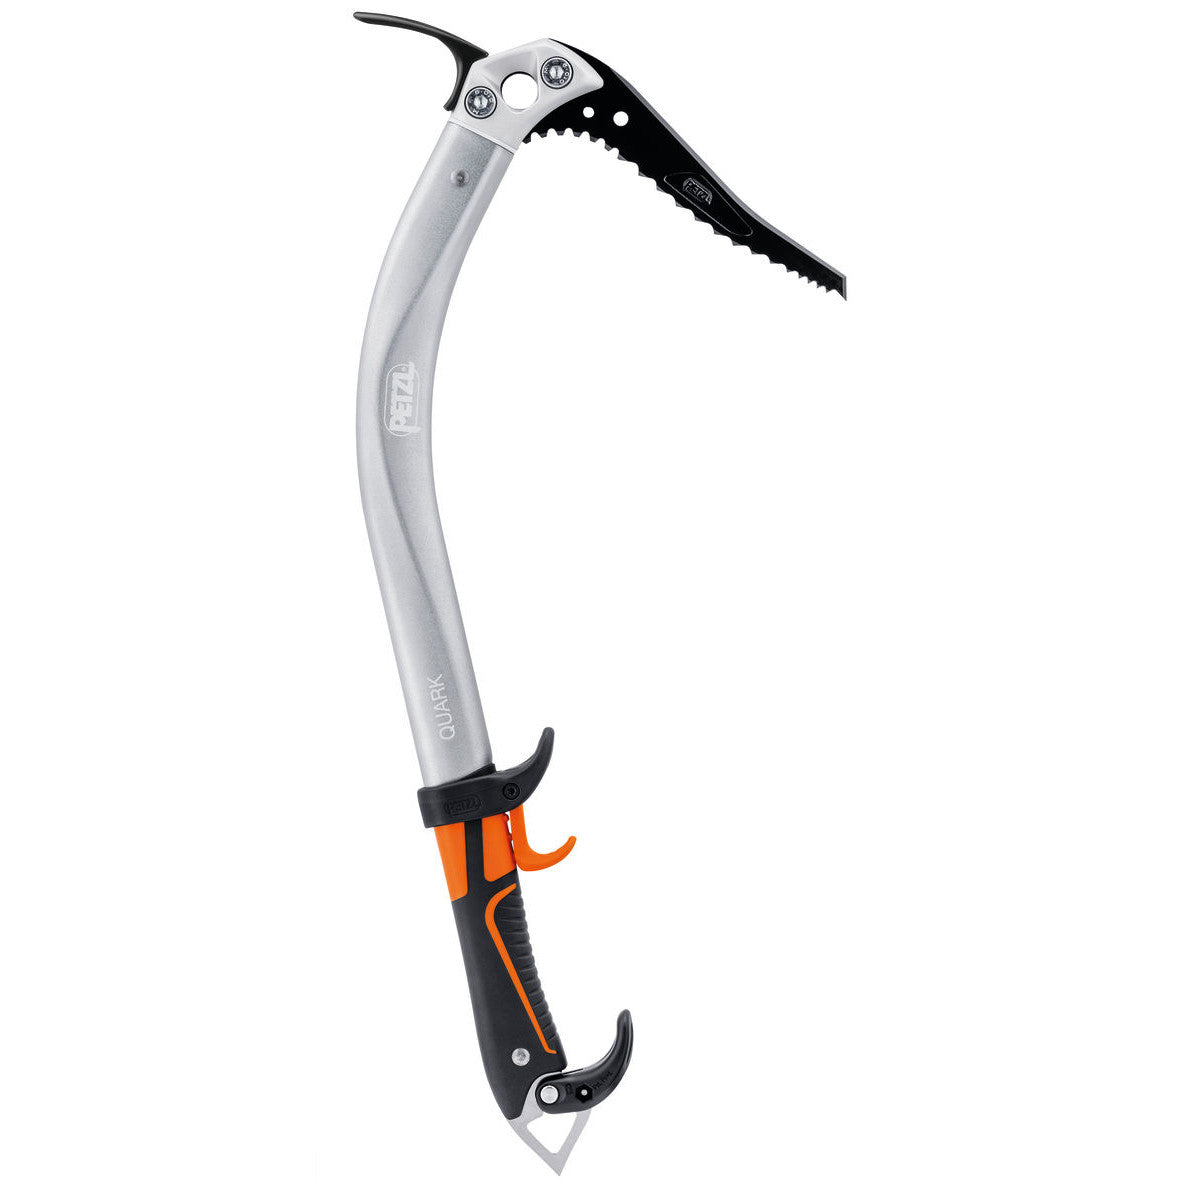 Petzl Quark Ice Axe, side view shown with a black handle and pick, and silver shaft